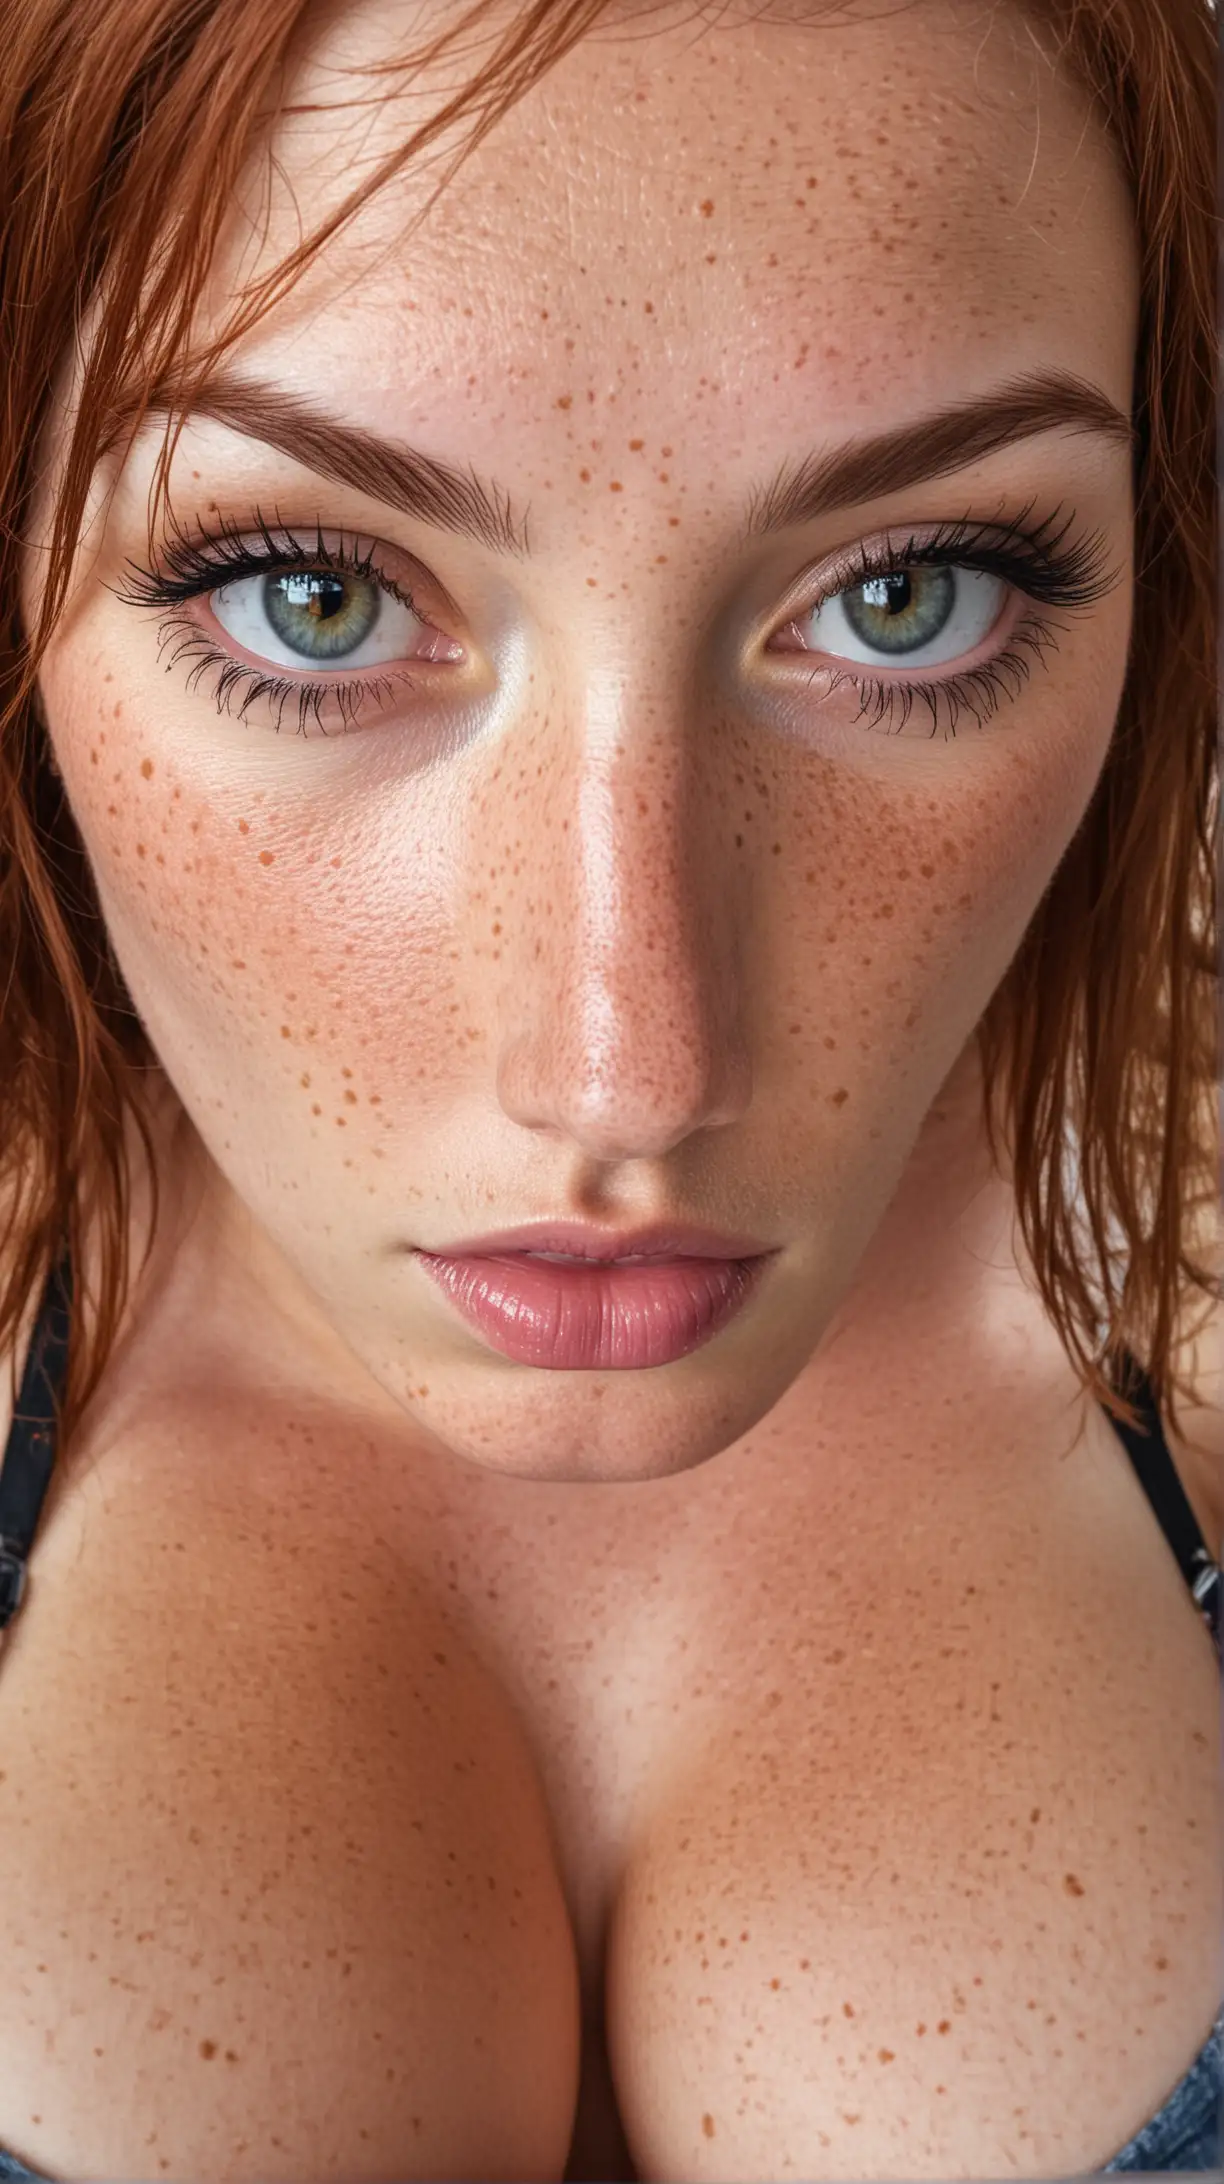 CloseUp Portrait of Woman with Freckles and Plunging Neckline